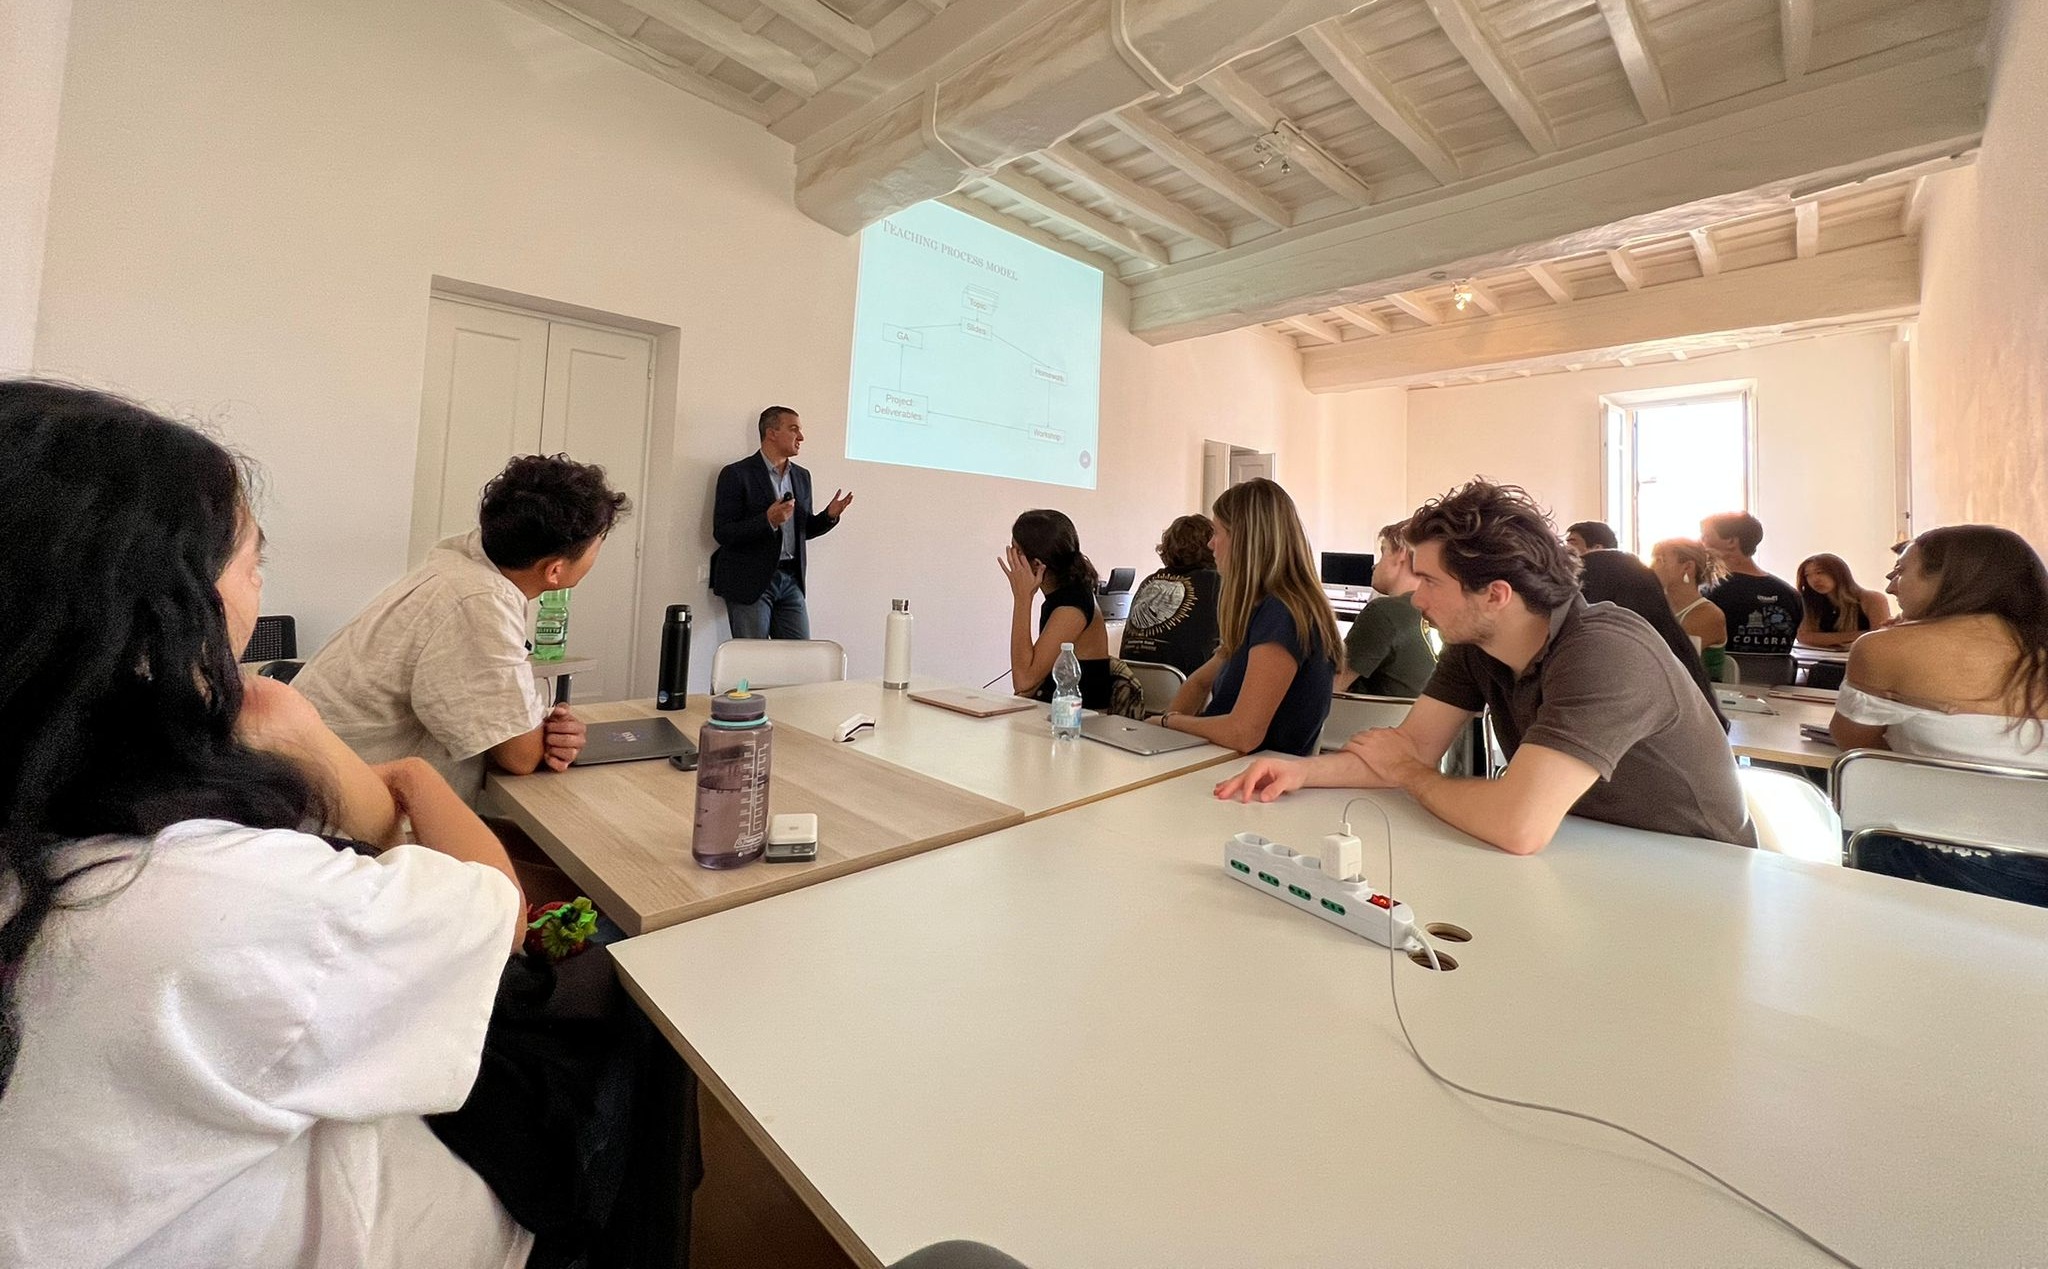 Professor teaches students in a classroom located in Rome